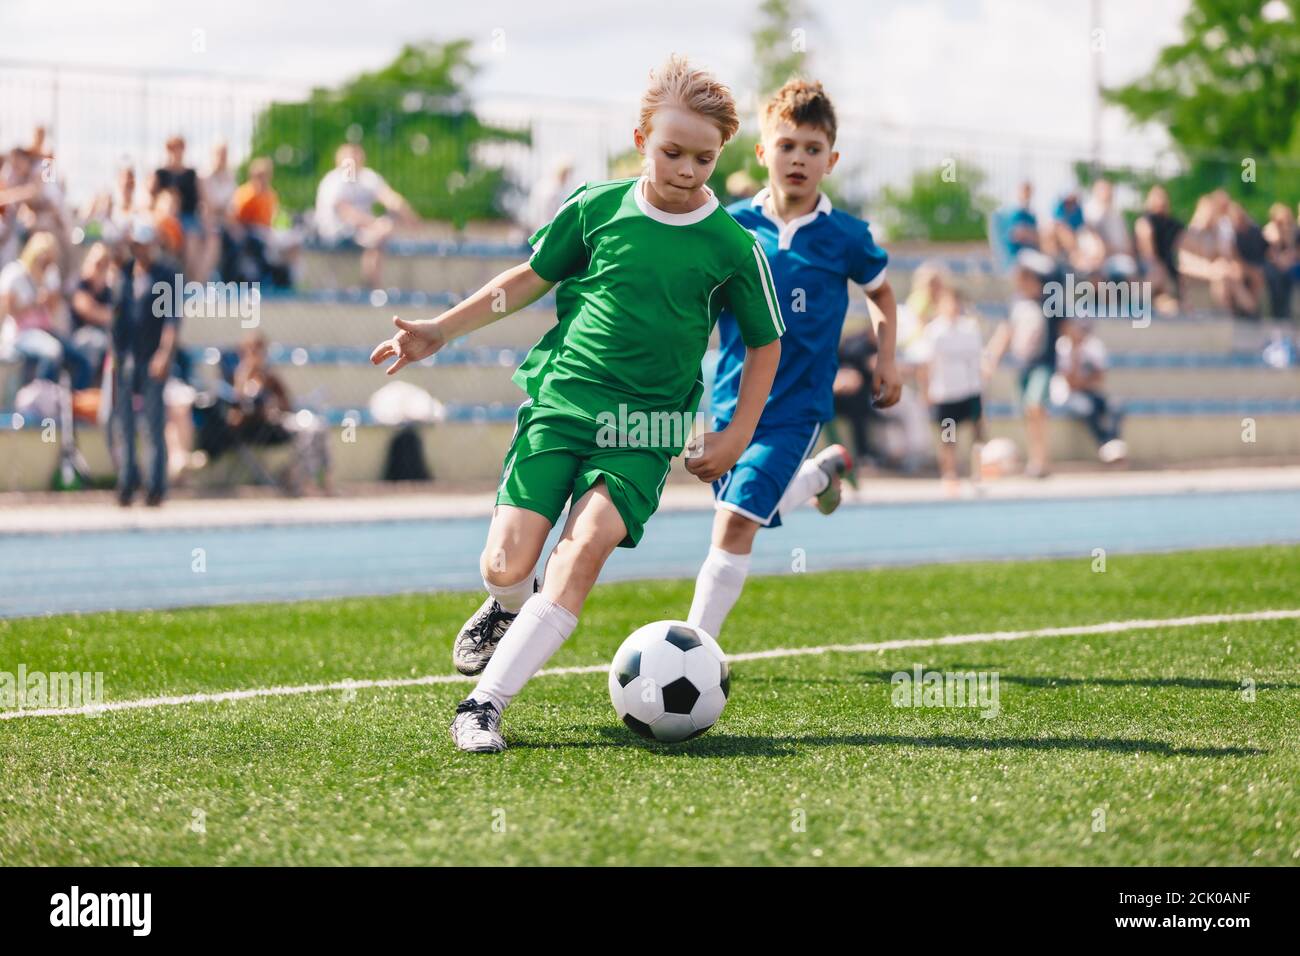 Young boys playing soccer game. Kids having fun in sport. Happy kids compete in football game. Running soccer players. Competition between players run Stock Photo